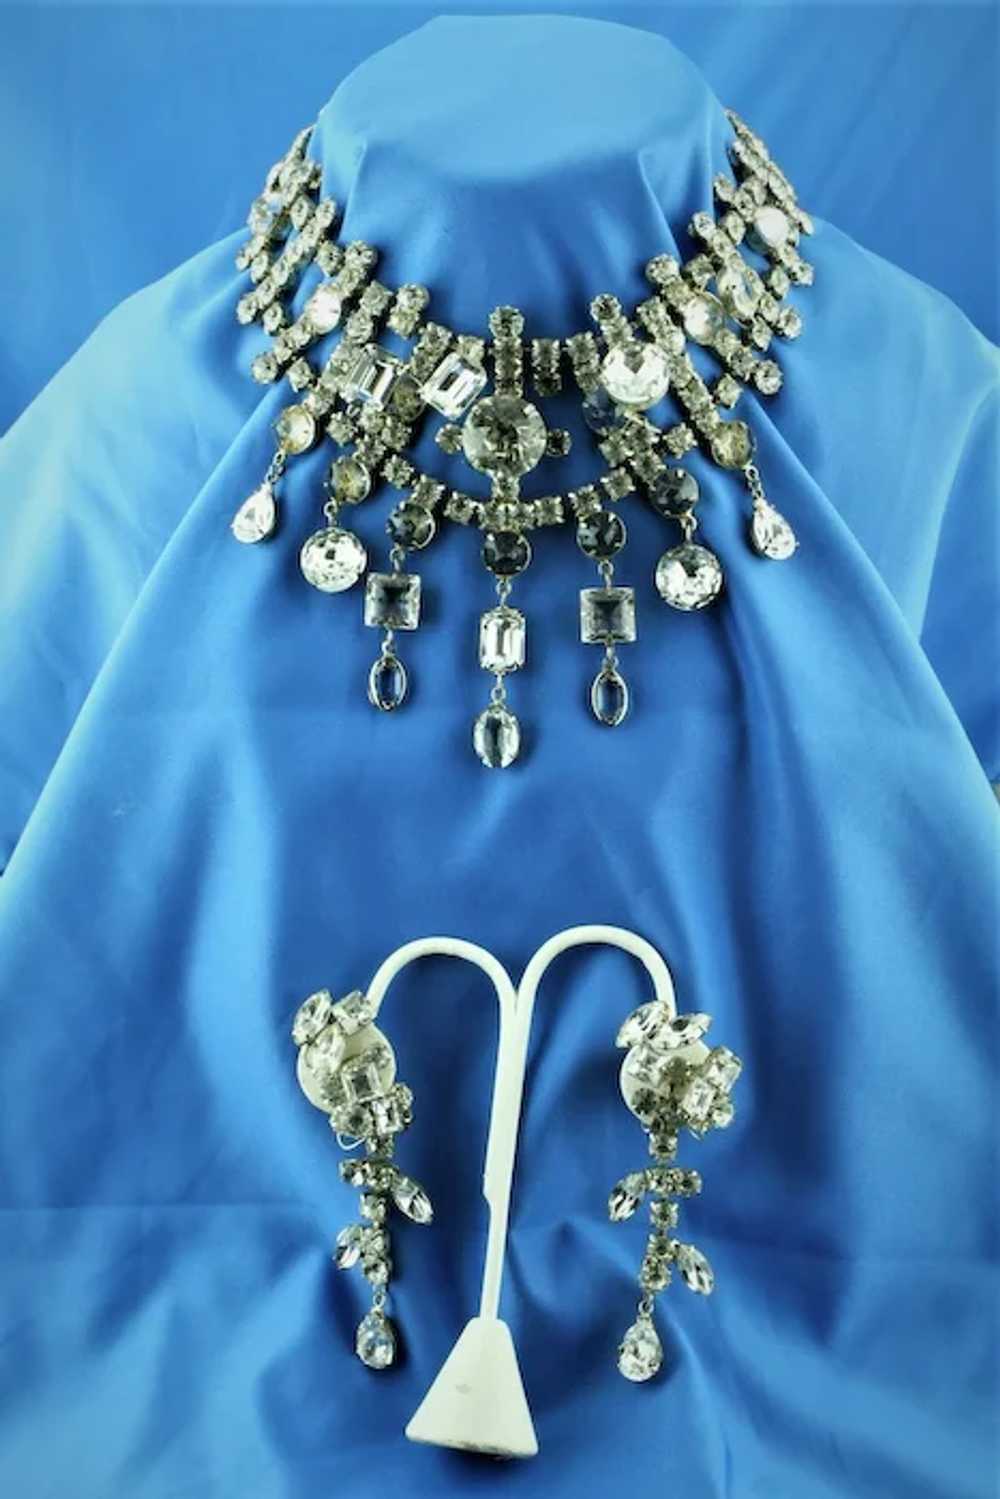 Kenneth Lane for Dynasty Necklace and Earrings - image 8